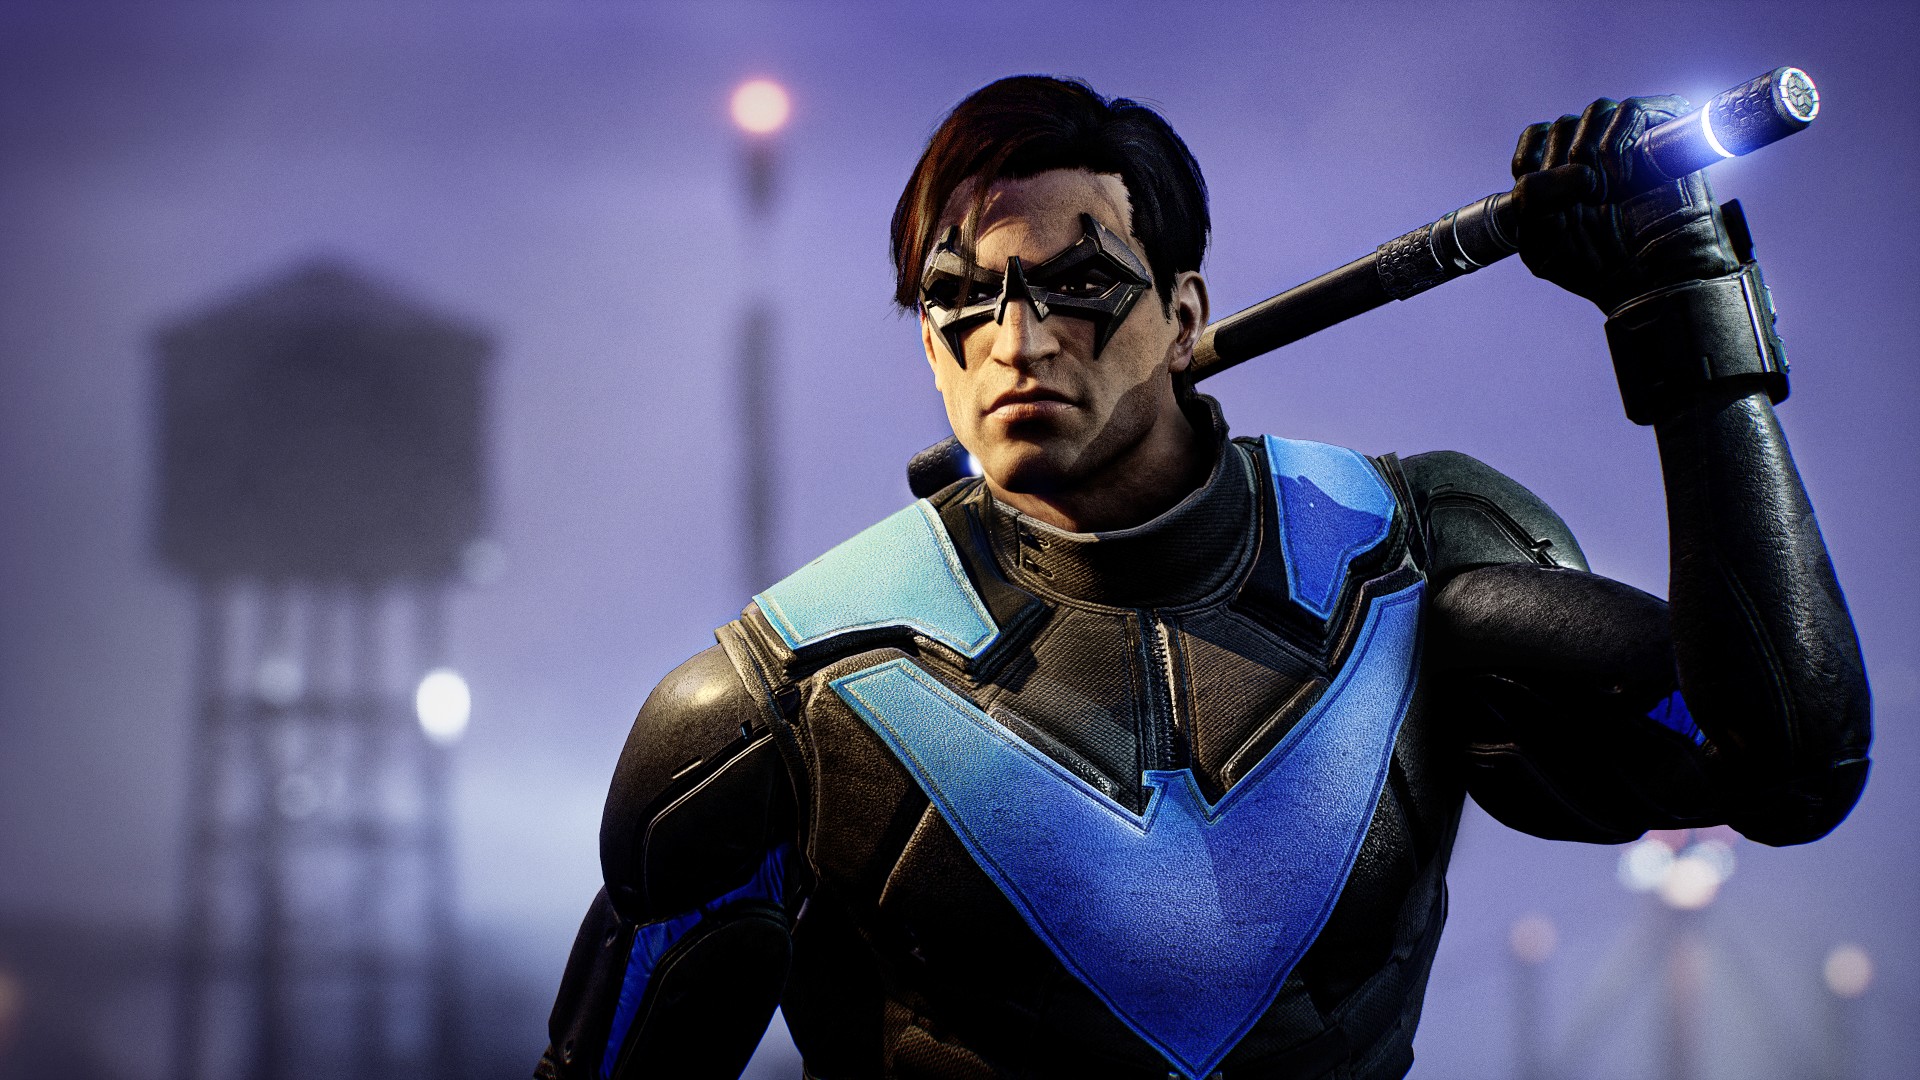 Gotham Knights' great story suffers from this game-writing trend